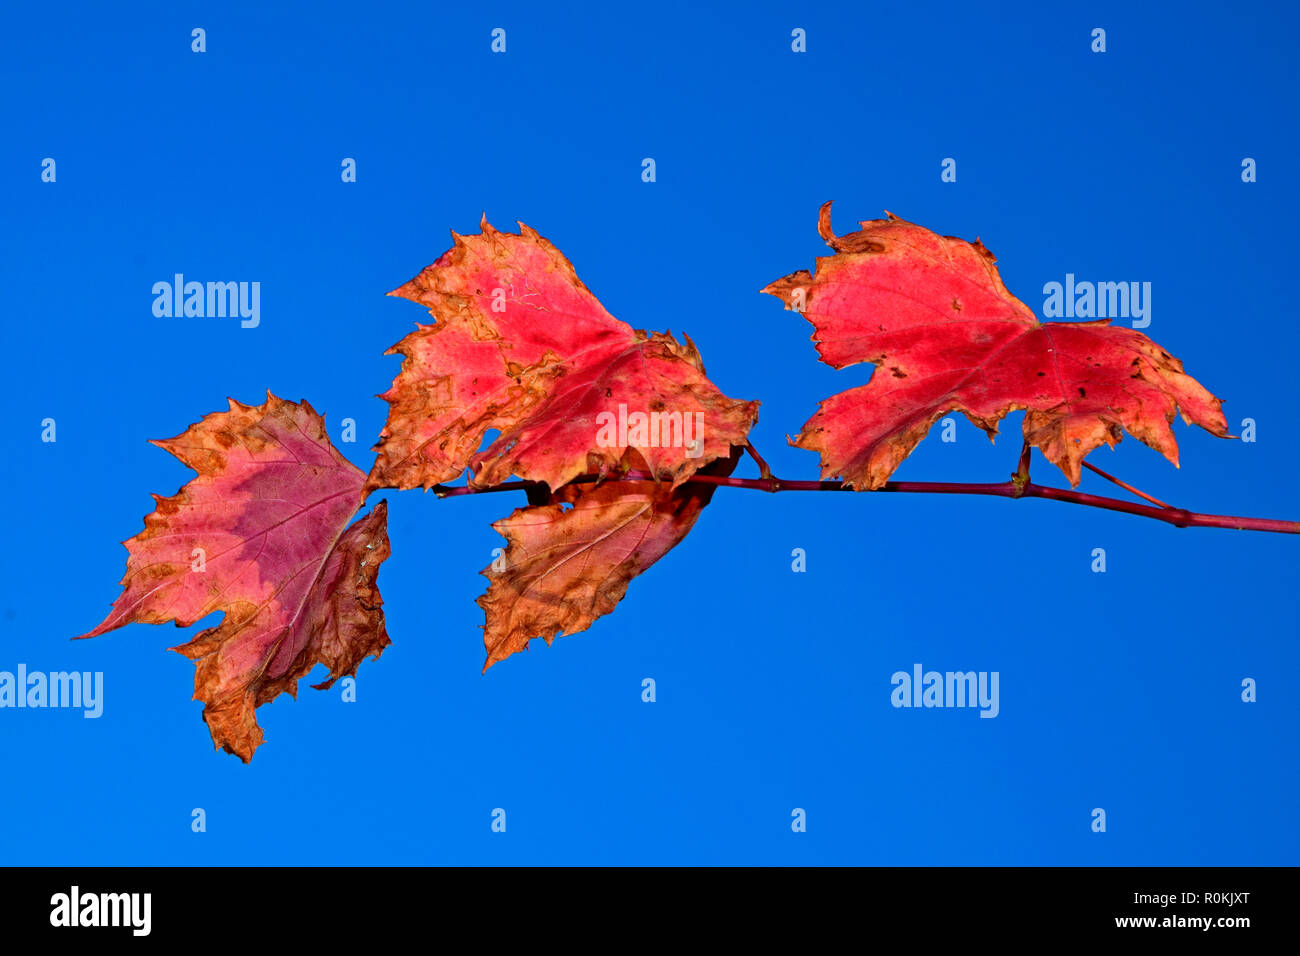 Three grapevine leaves on a twig, purple red and partially dry , blue sky background Stock Photo